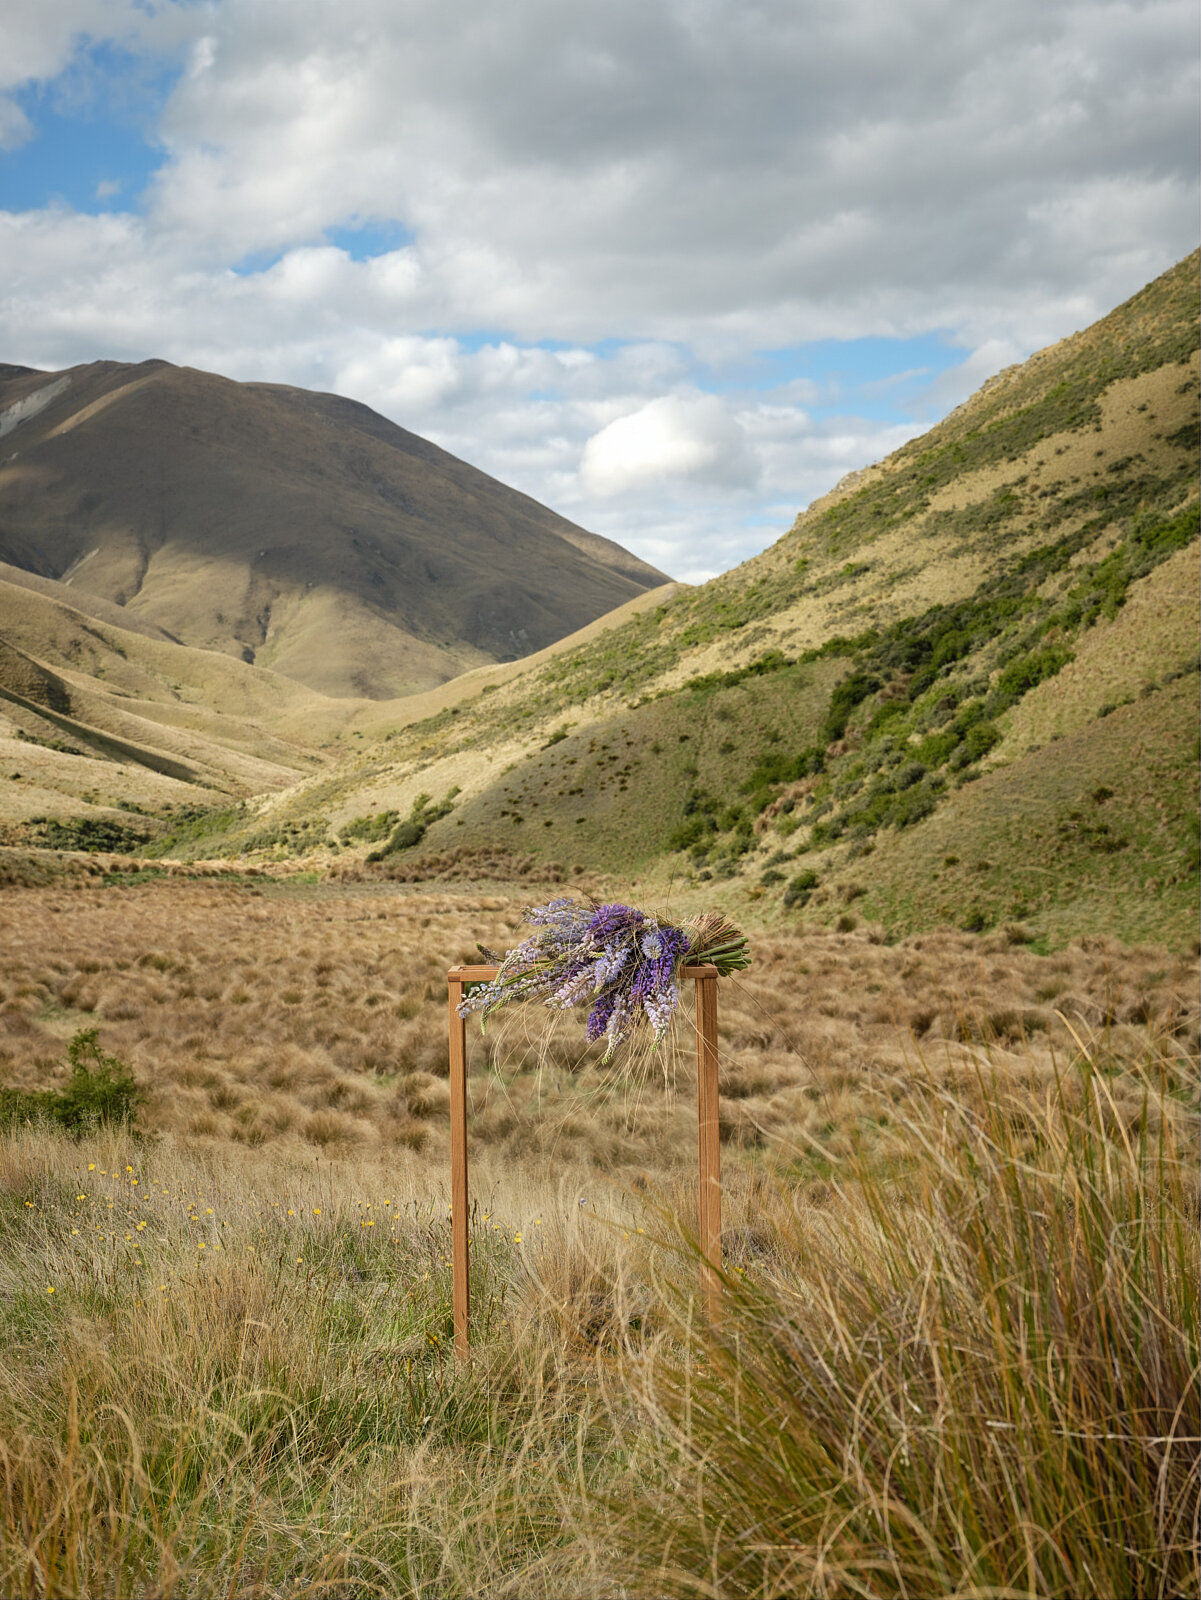   Lupin and Tussock- Lindis Pass, Canterbury. 2020.  1080 x 830mm  